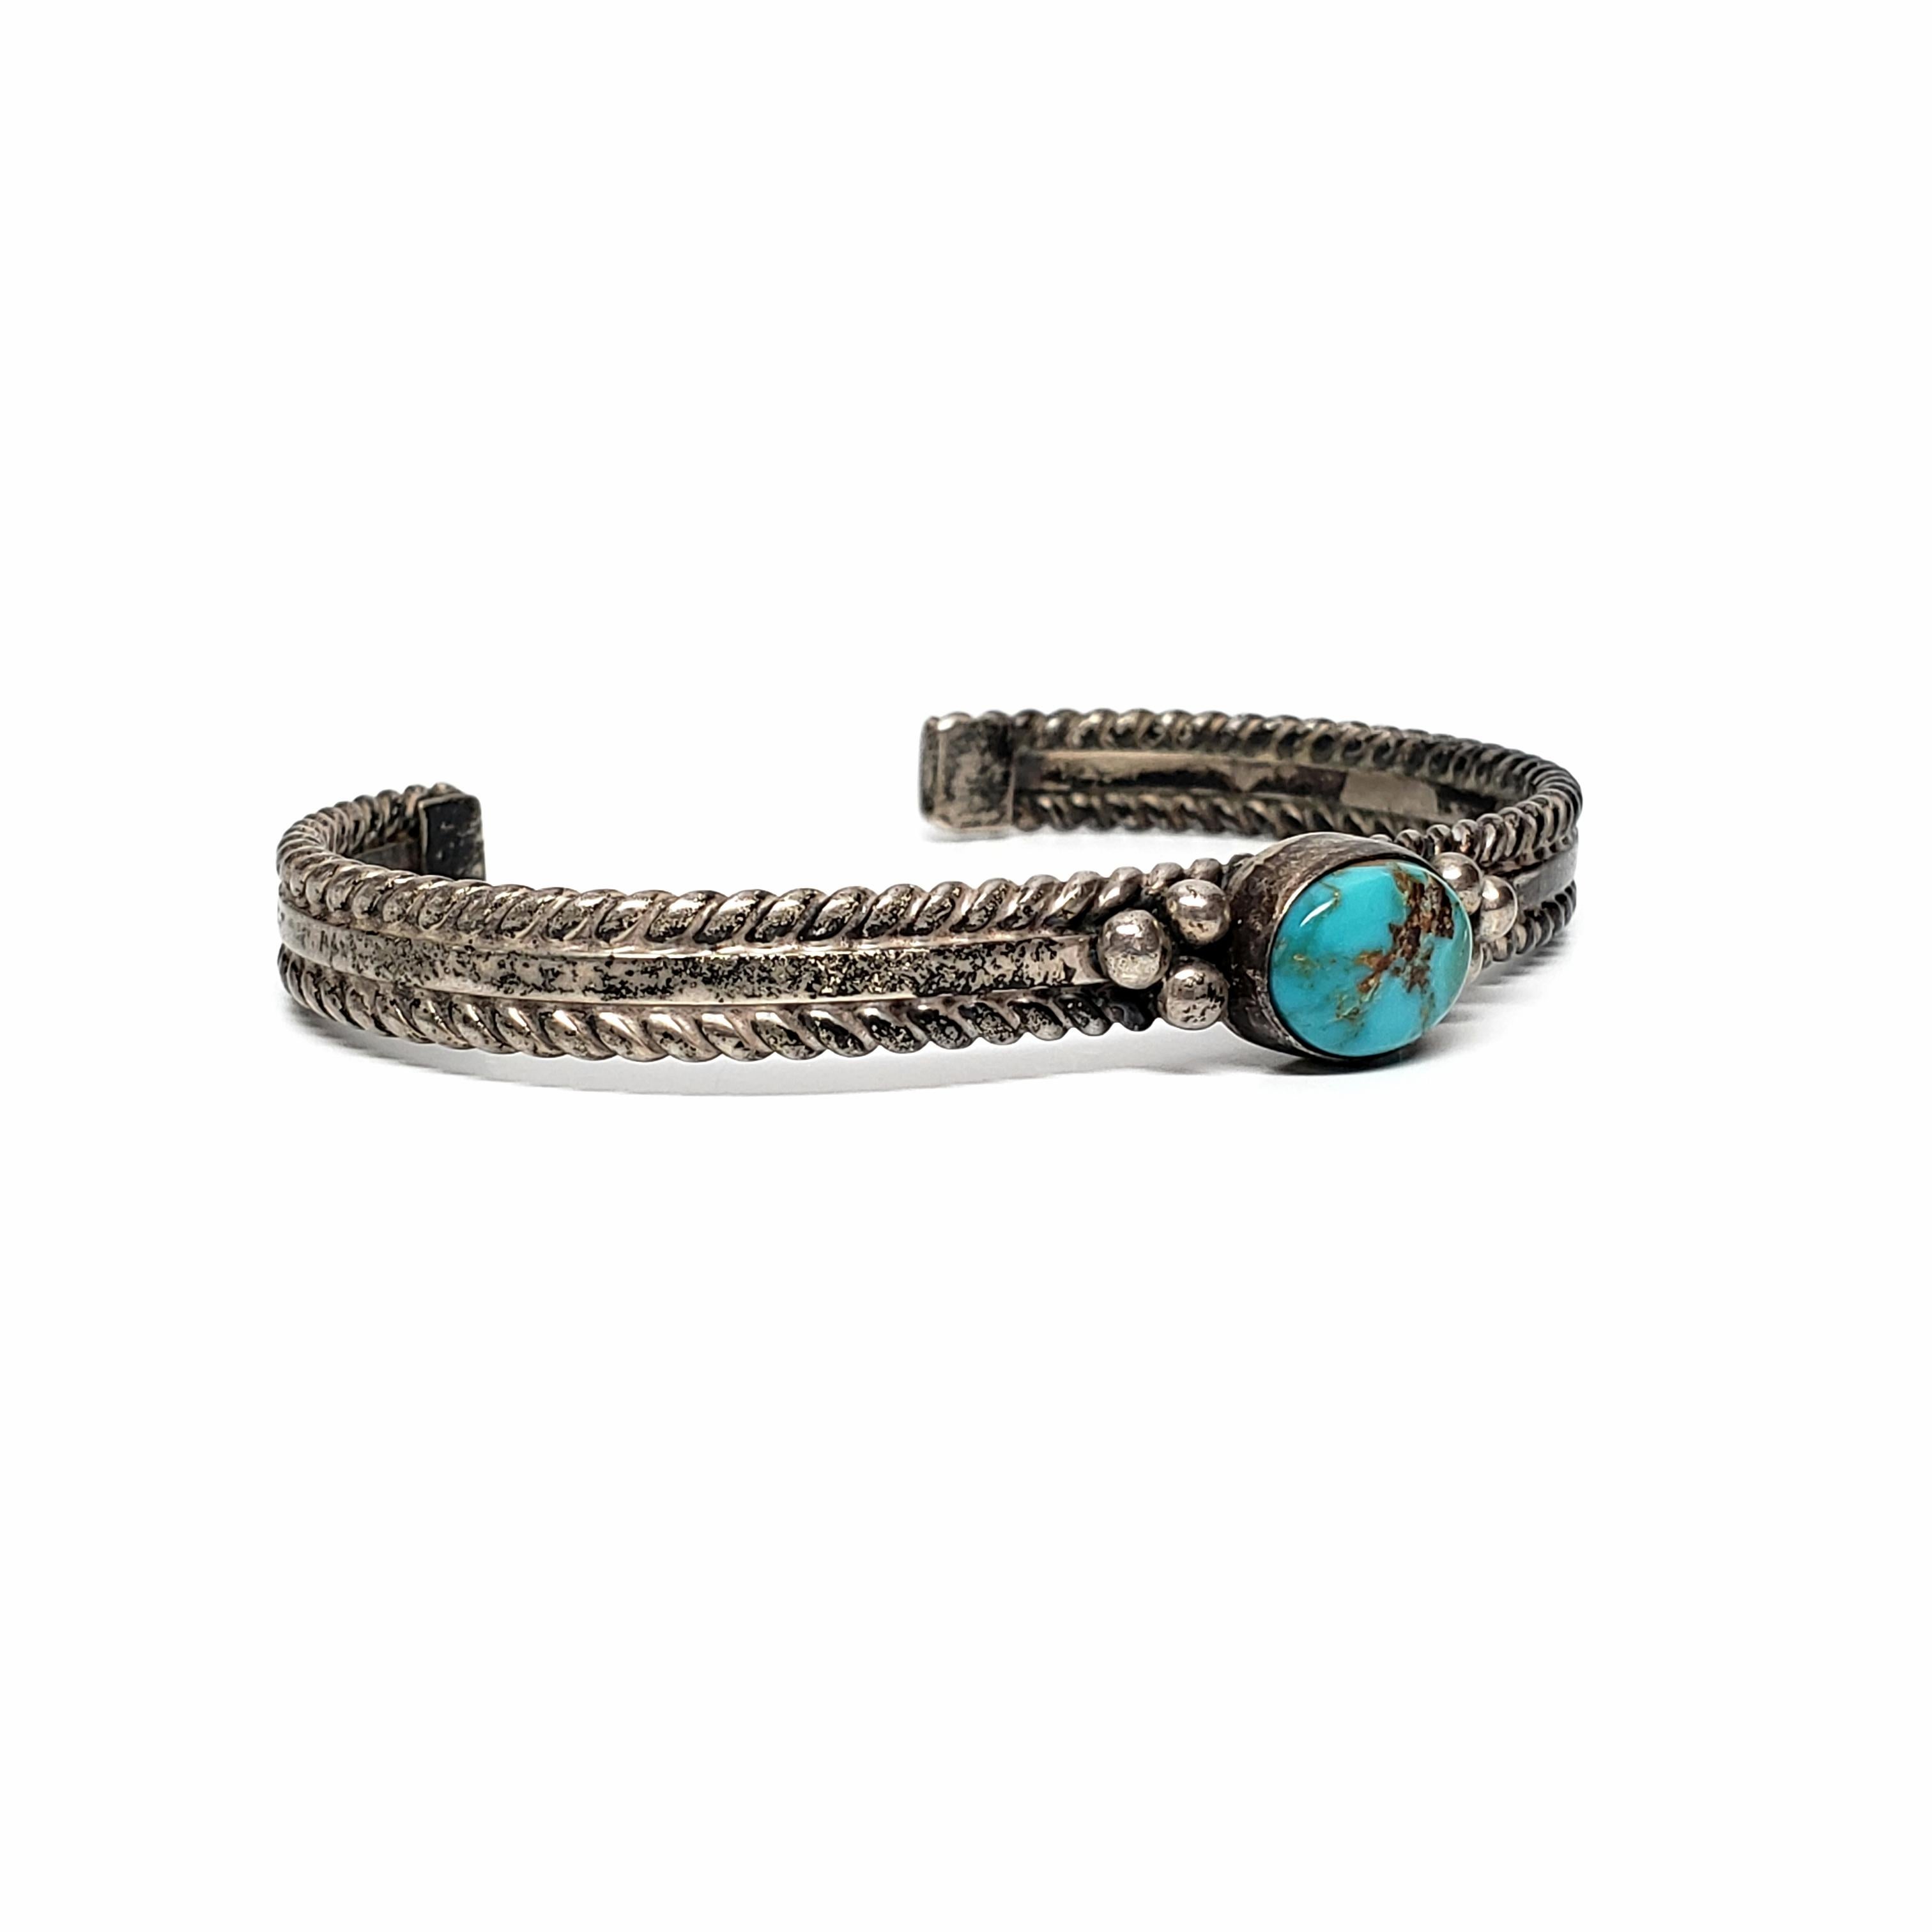 Sterling silver and turquoise cuff bracelet by Native American artisan, Andy Cadman.

Andy Cadman has been making handmade jewelry for 25+ years. Bezel set oval turquoise adorned with silver beaded accents and rope edging.

Measures approx 5 1/4